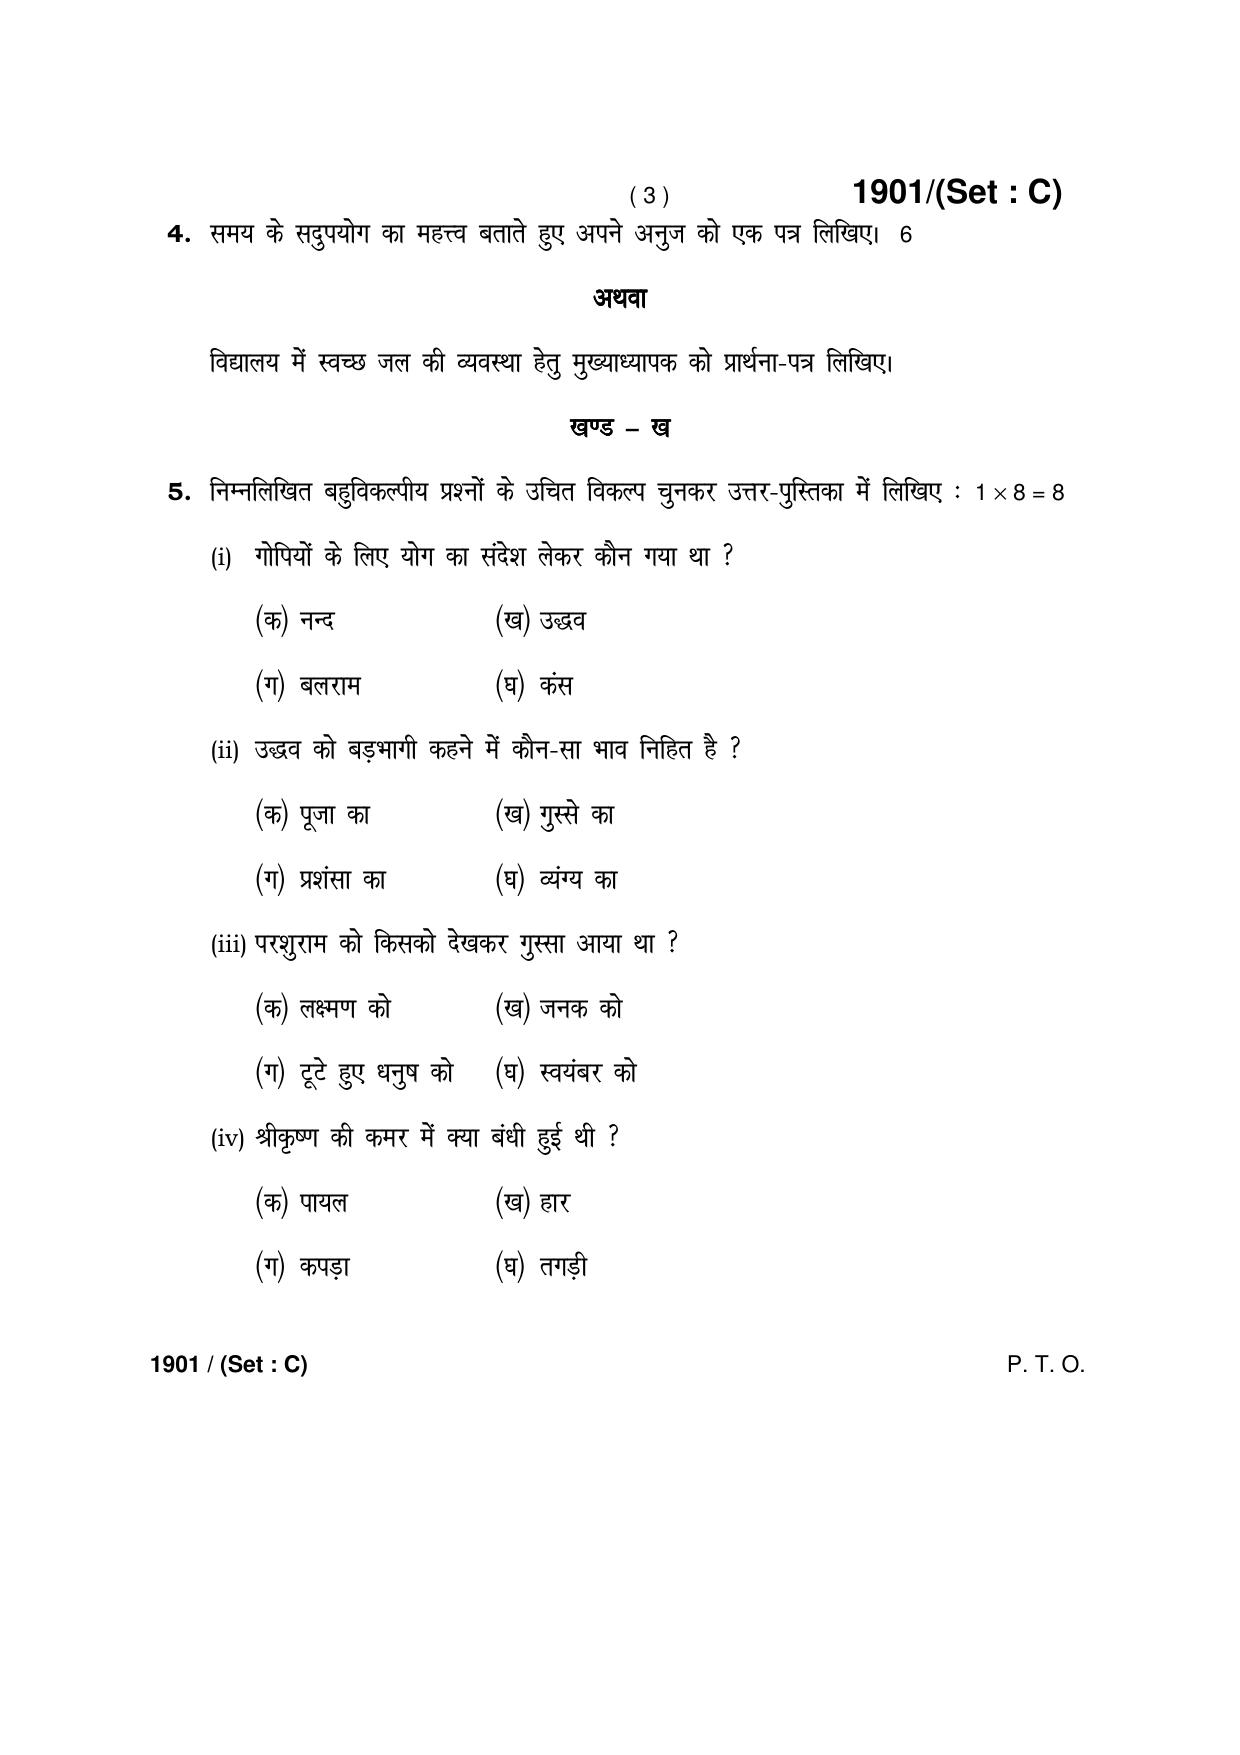 Haryana Board HBSE Class 10 Hindi -C 2017 Question Paper - Page 3